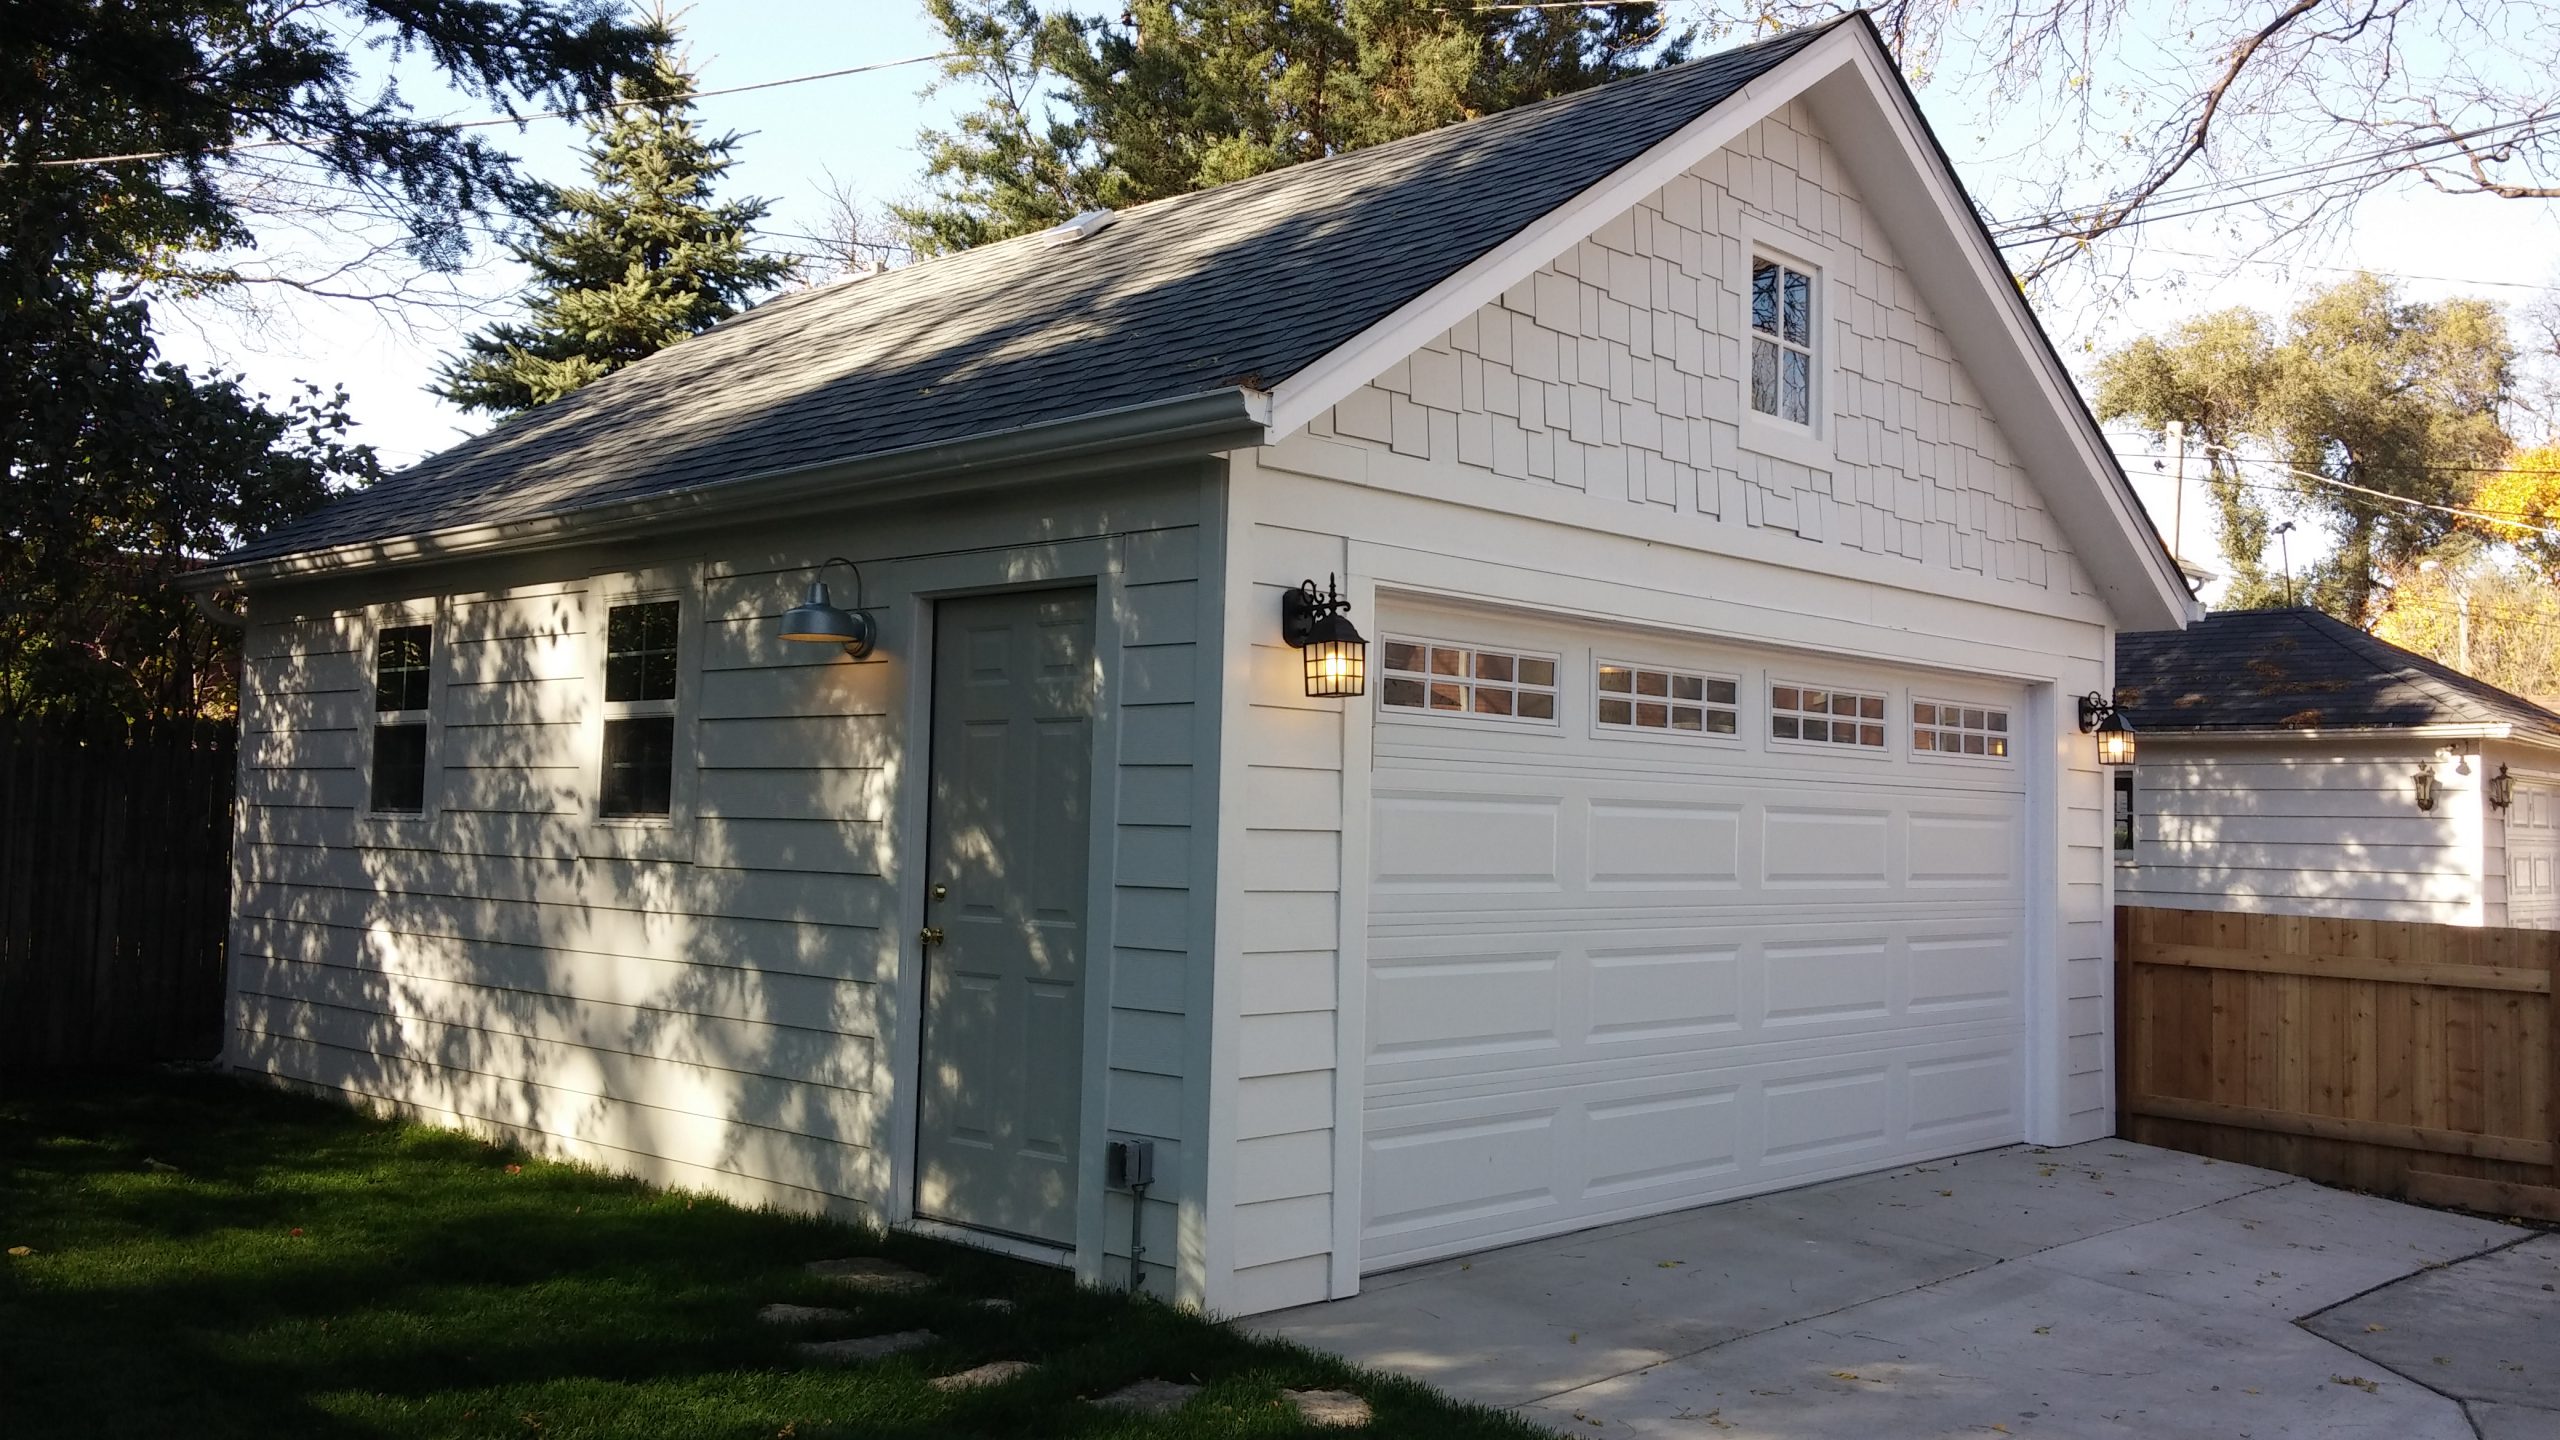 RYAN PARKS OAK PARK CUSTOM CEMENT BOARD SIDING DOORS TRIM GABLE ENDS WITH ATTIC STORAGE AND STAIRS  (10) (1)